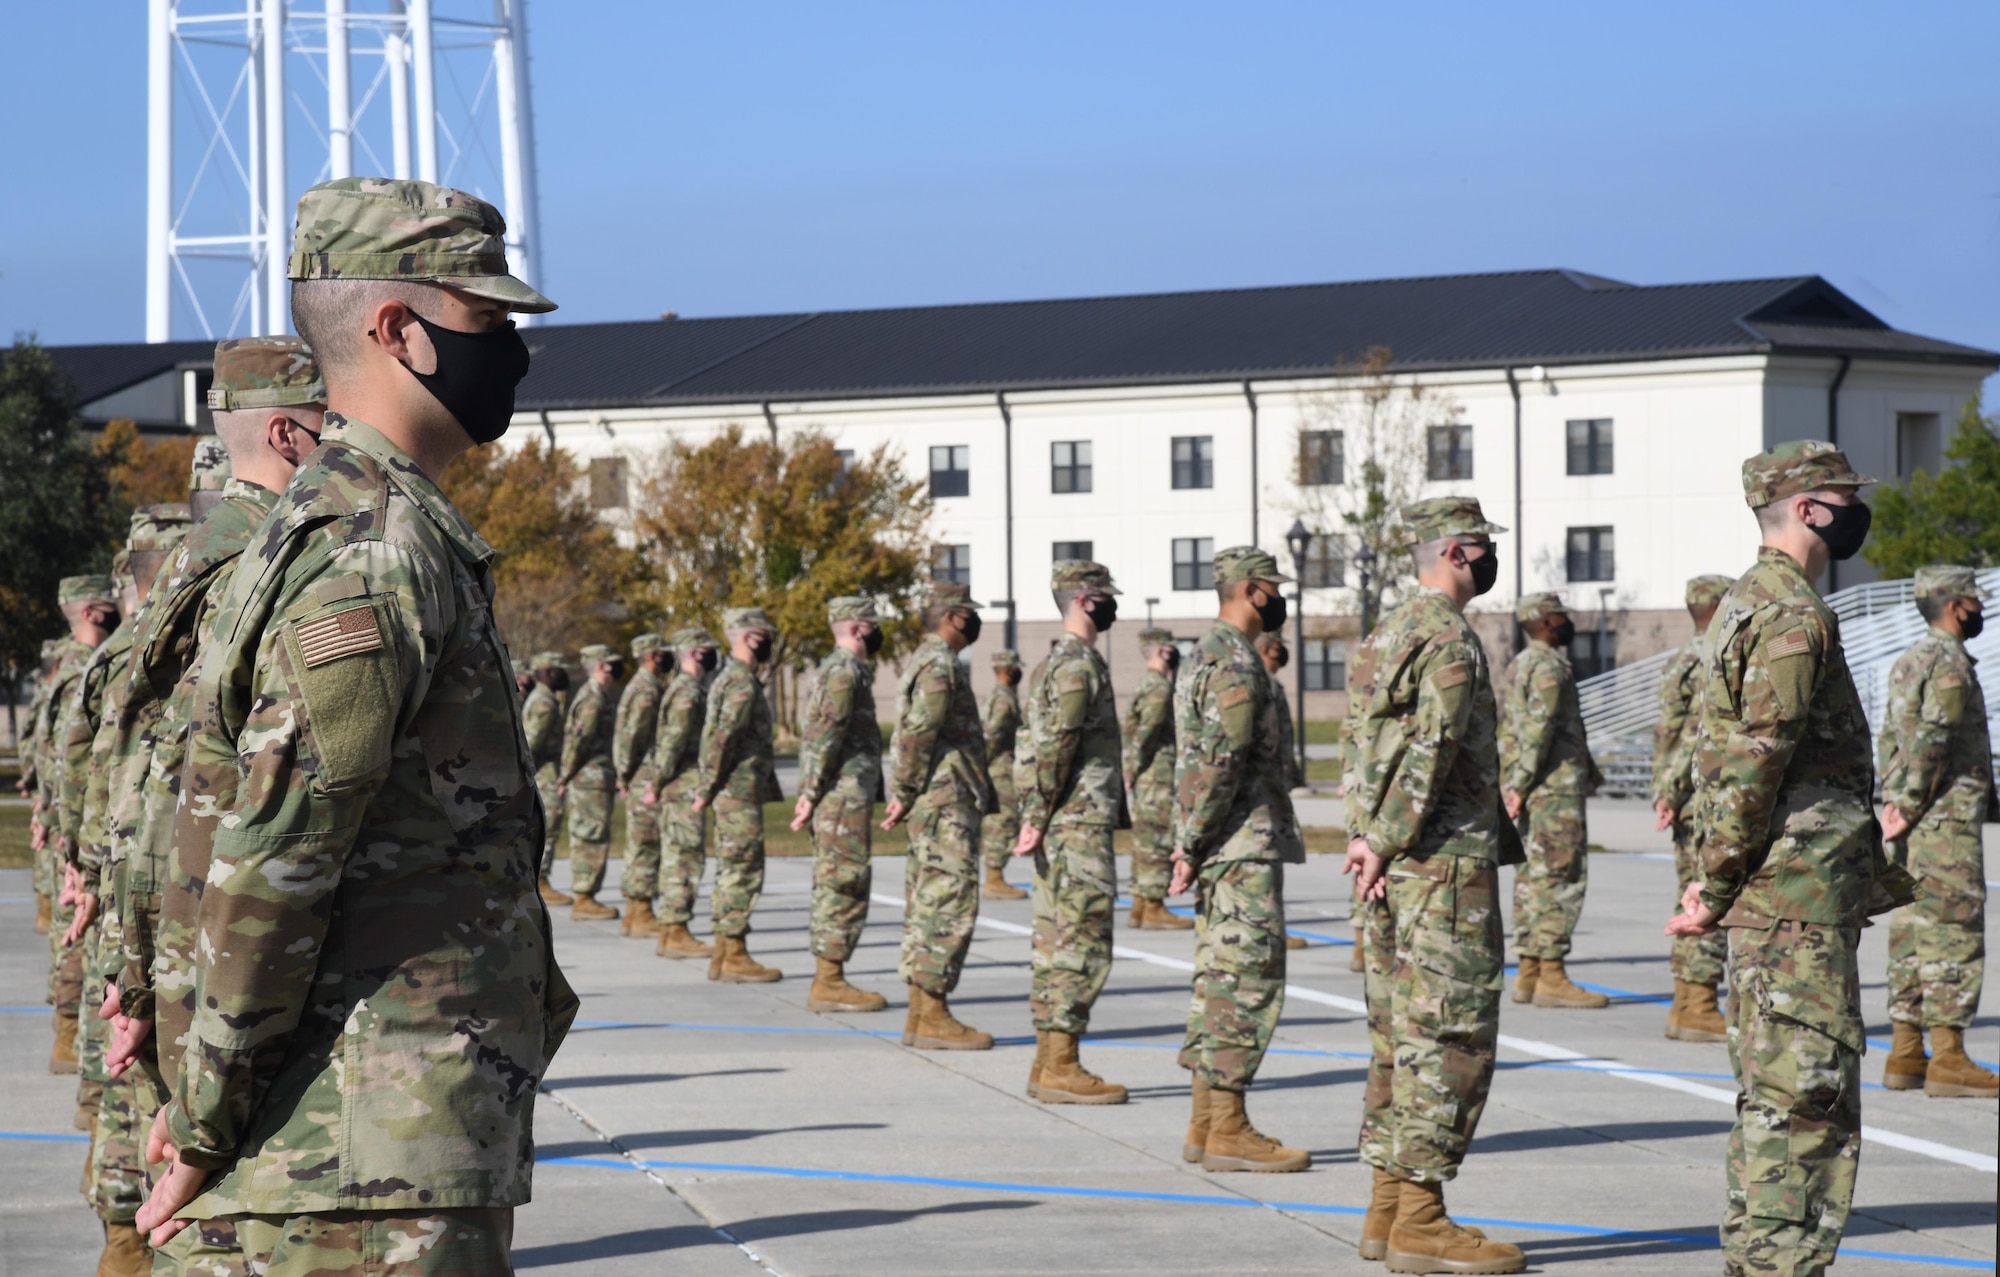 Graduating basic military training trainees stand in formation on the Levitow Training Support Facility drill pad during the final BMT graduation ceremony at Keesler Air Force Base, Mississippi, Nov. 6, 2020. Nearly 60 trainees from the 37th Training Wing Detachment 5 completed the six-week BMT course. Throughout the duration of BMT training at Keesler, 18 flights and 939 Airmen graduated. (U.S. Air Force photo by Kemberly Groue)